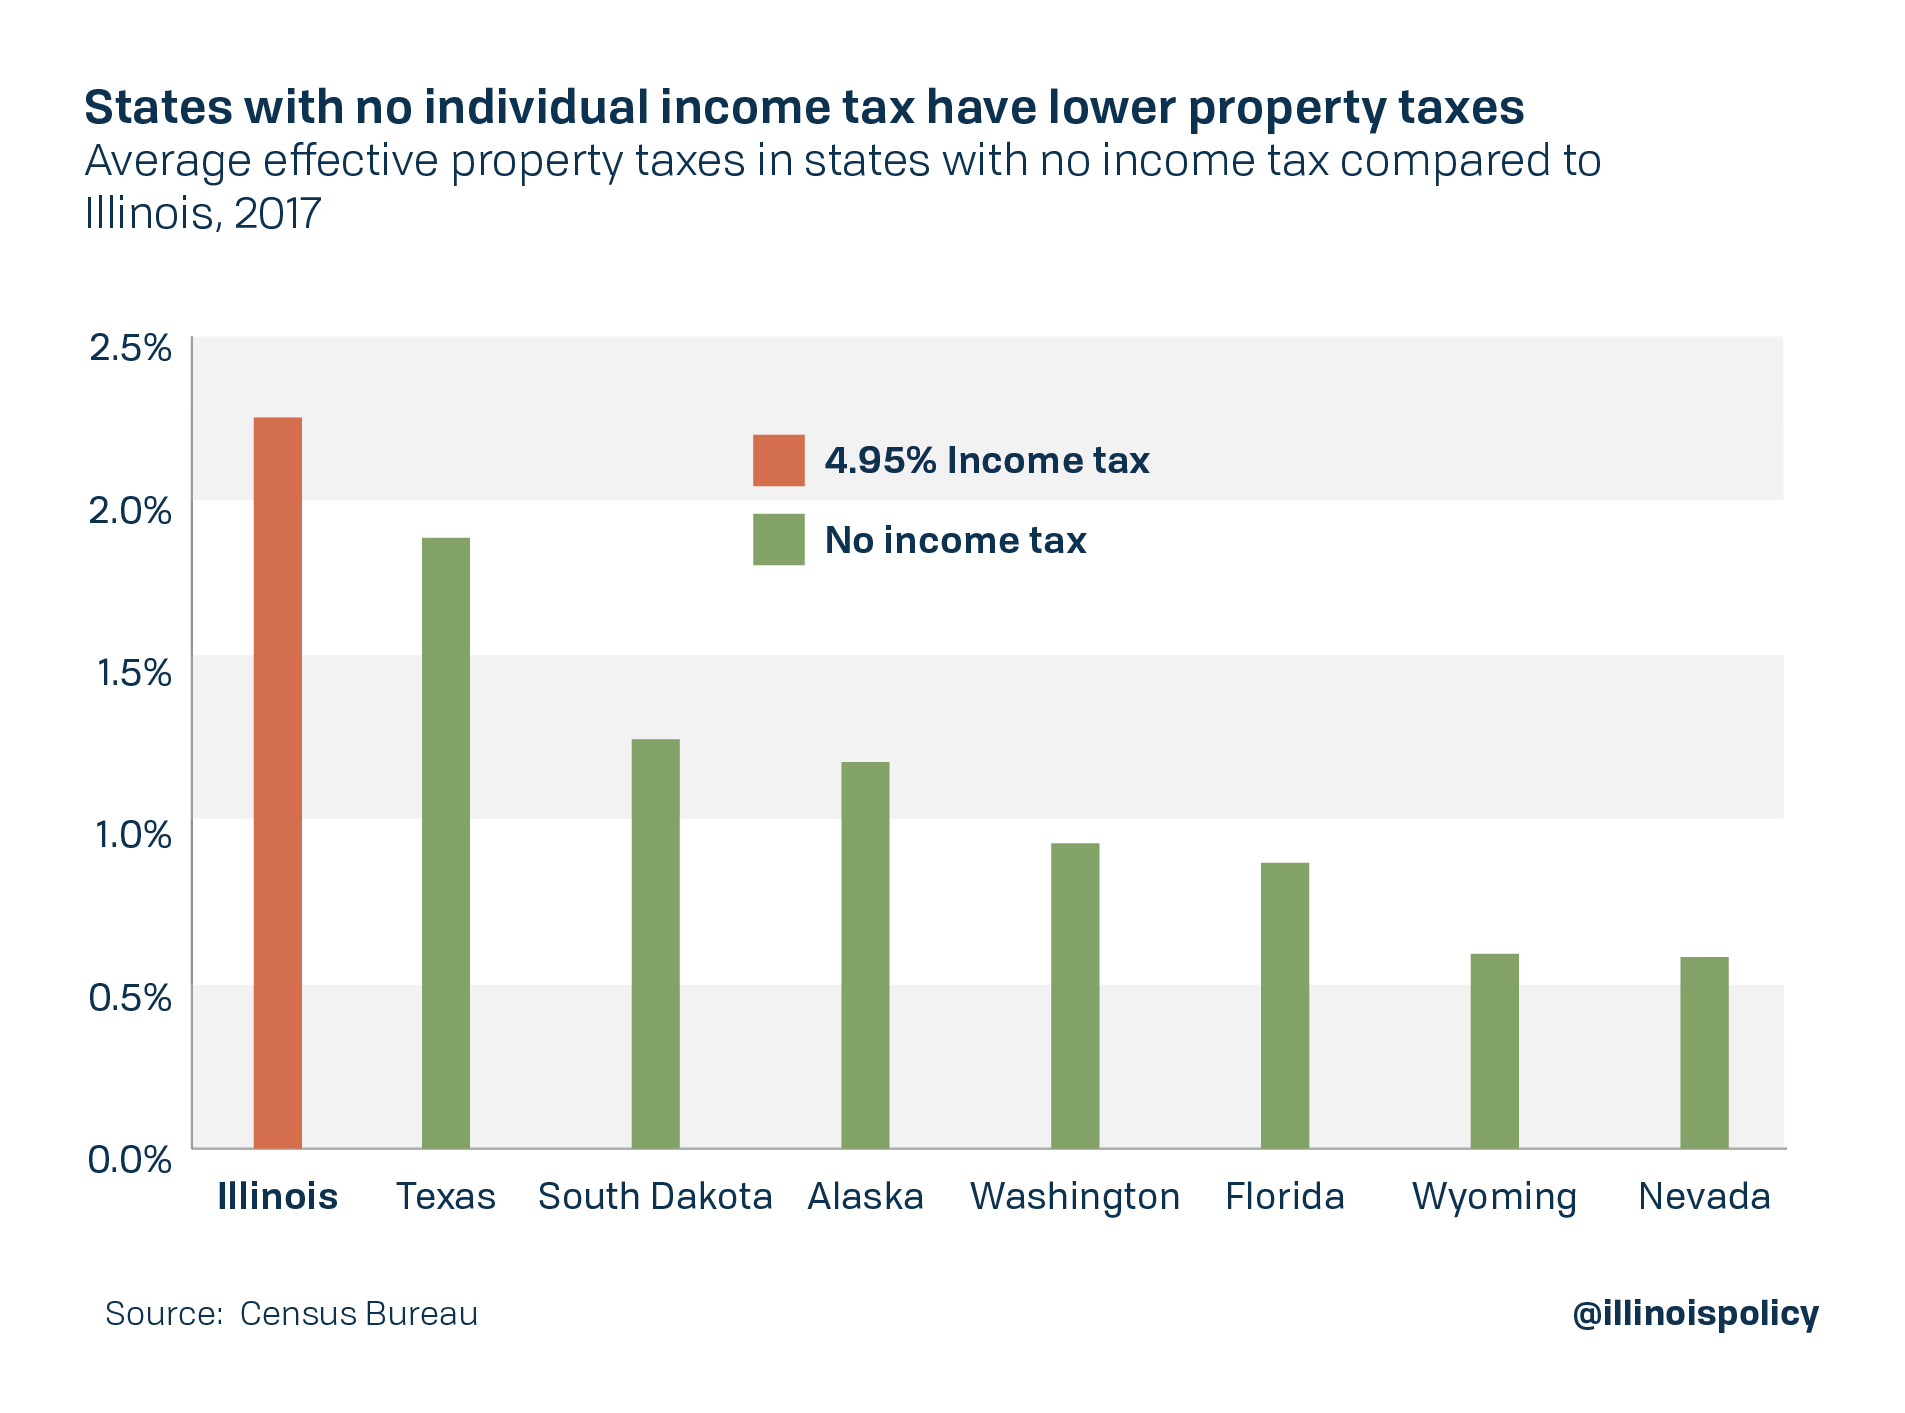 States with no income tax have lower property taxes